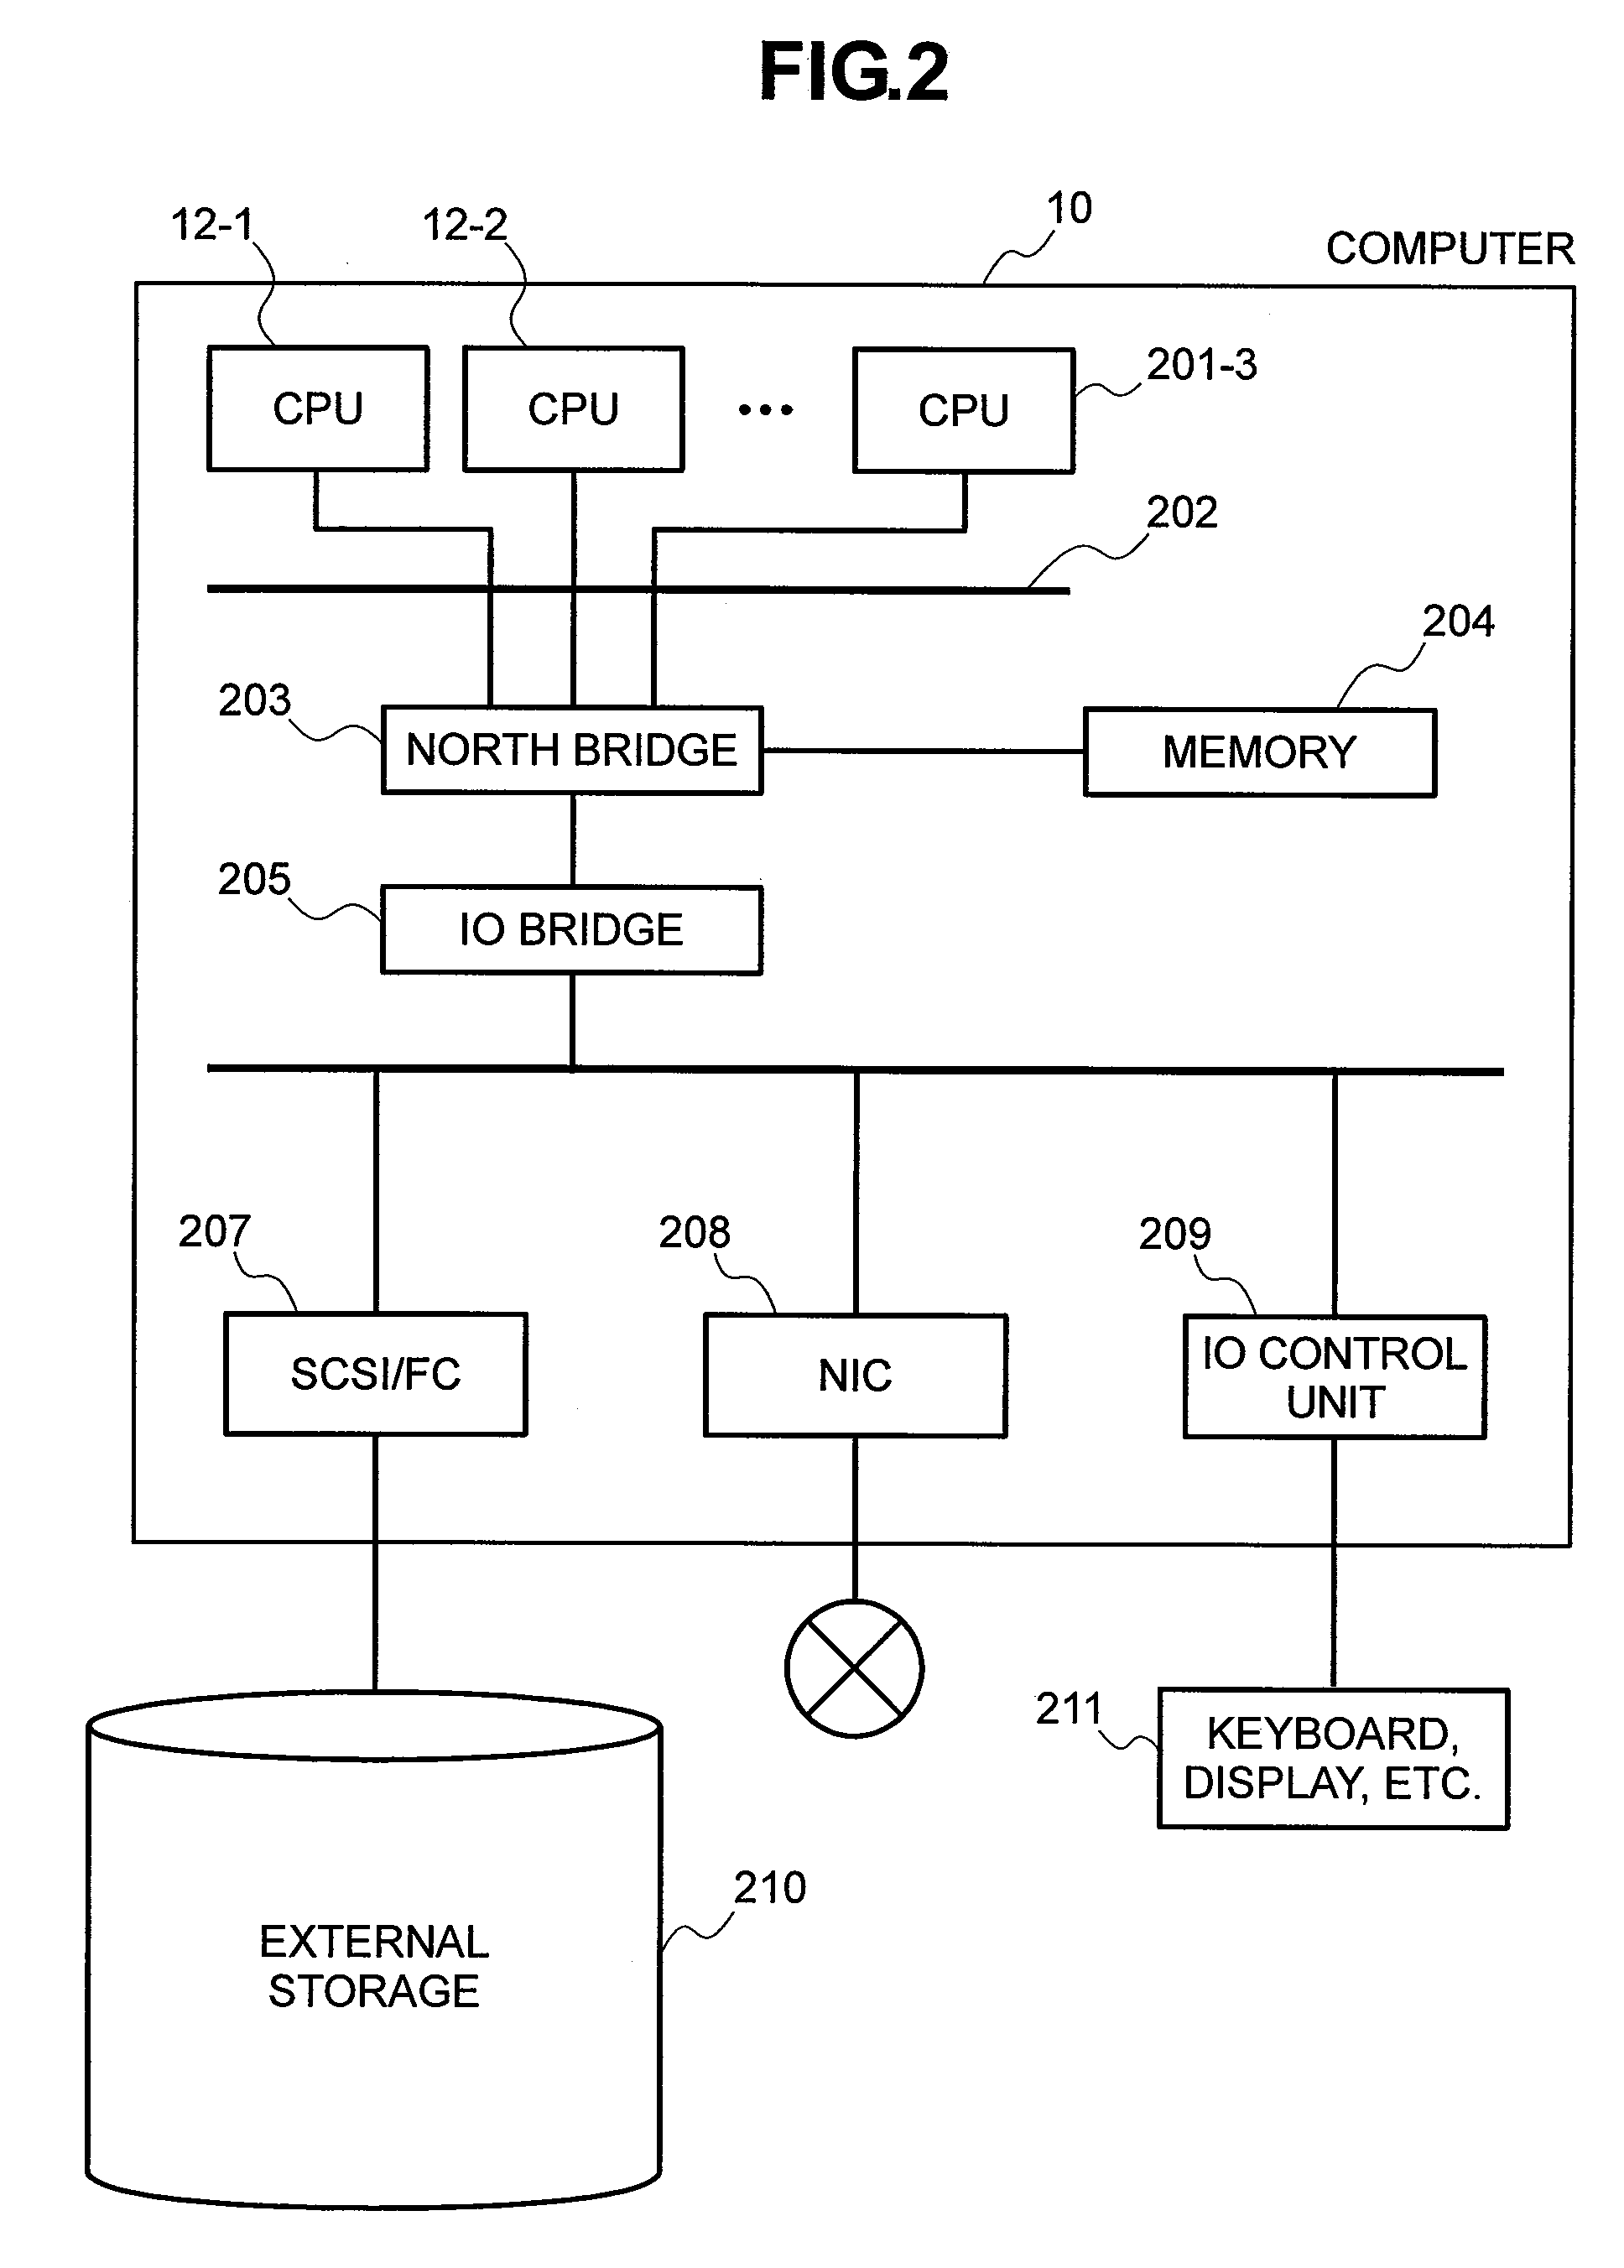 Computer virtualization apparatus and program and method therefor